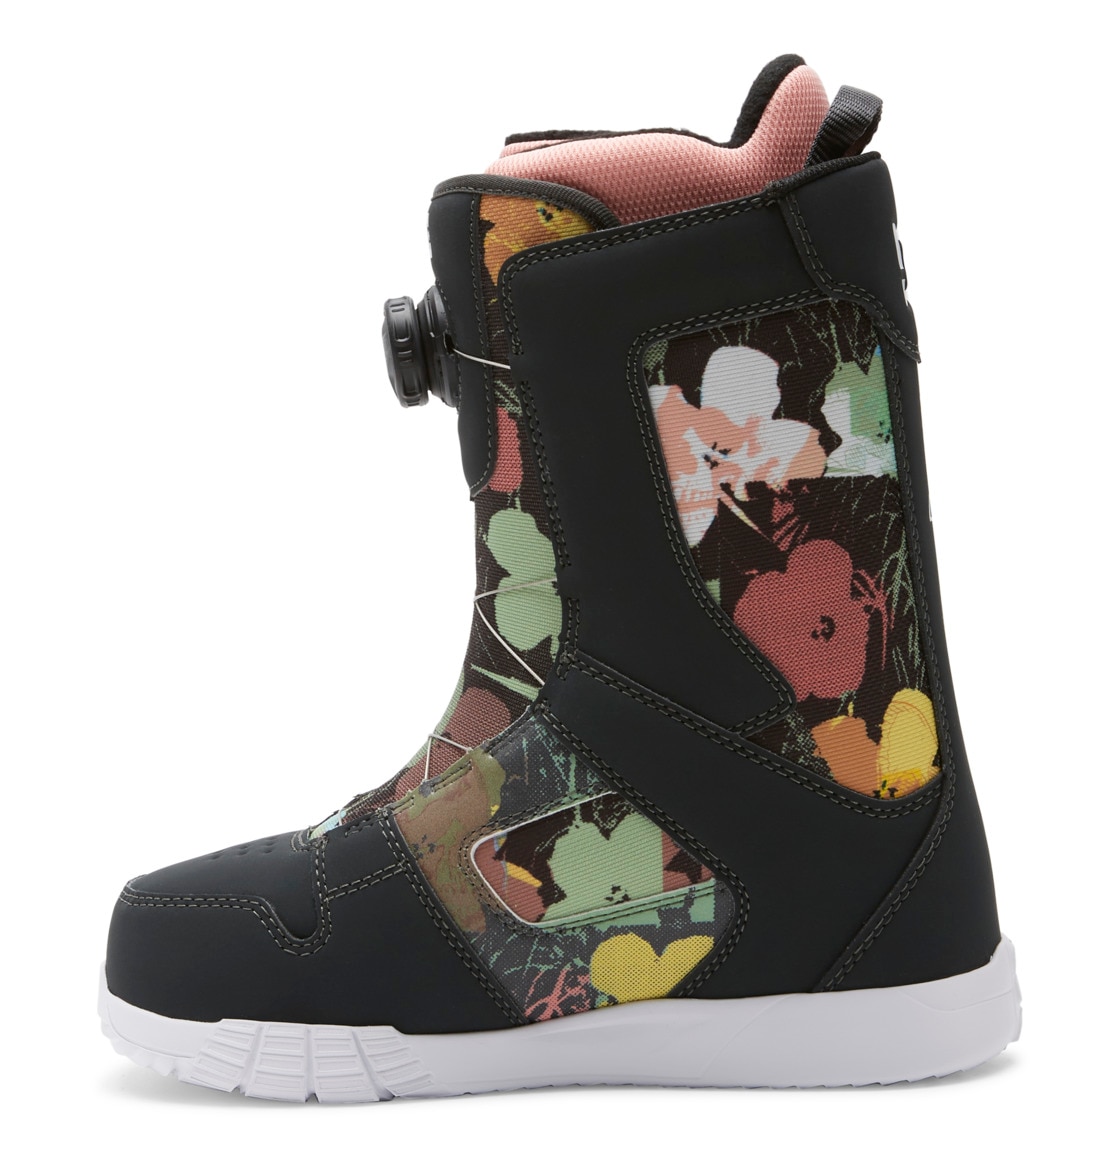 DC Shoes Snowboardboots »Andy Warhol x DC Shoes«